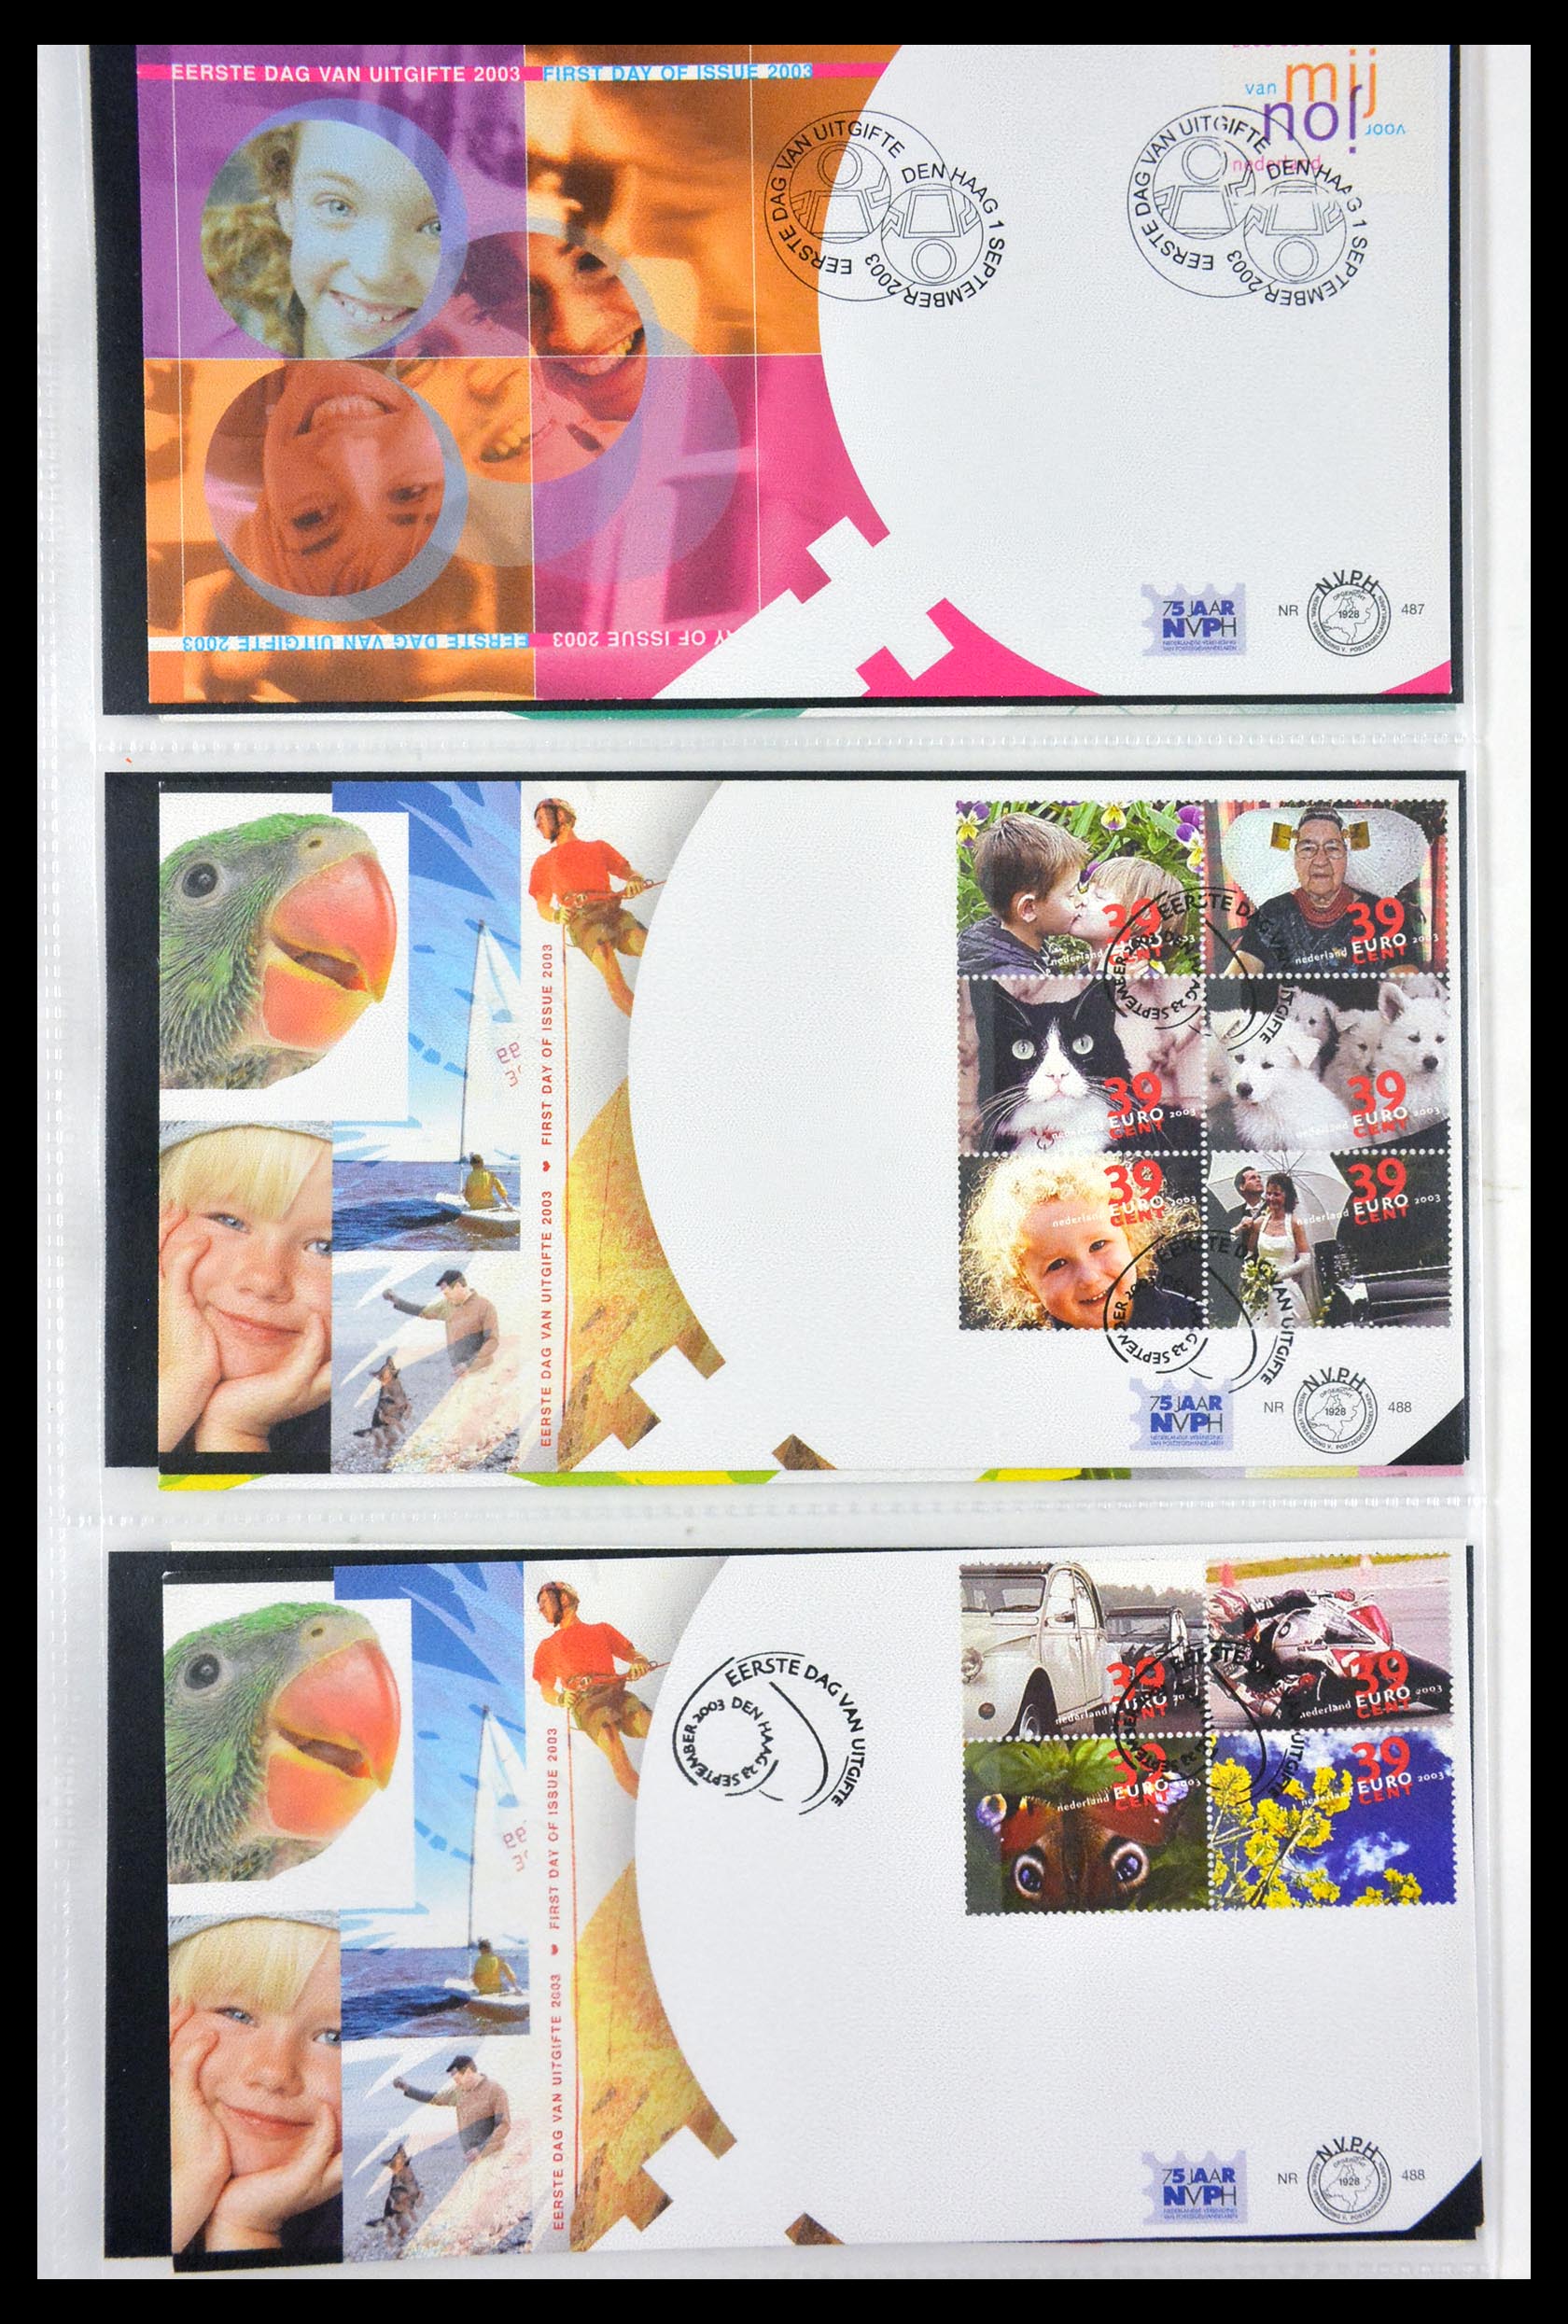 29850 021 - 29850 Netherlands FDC's 2001-2012.